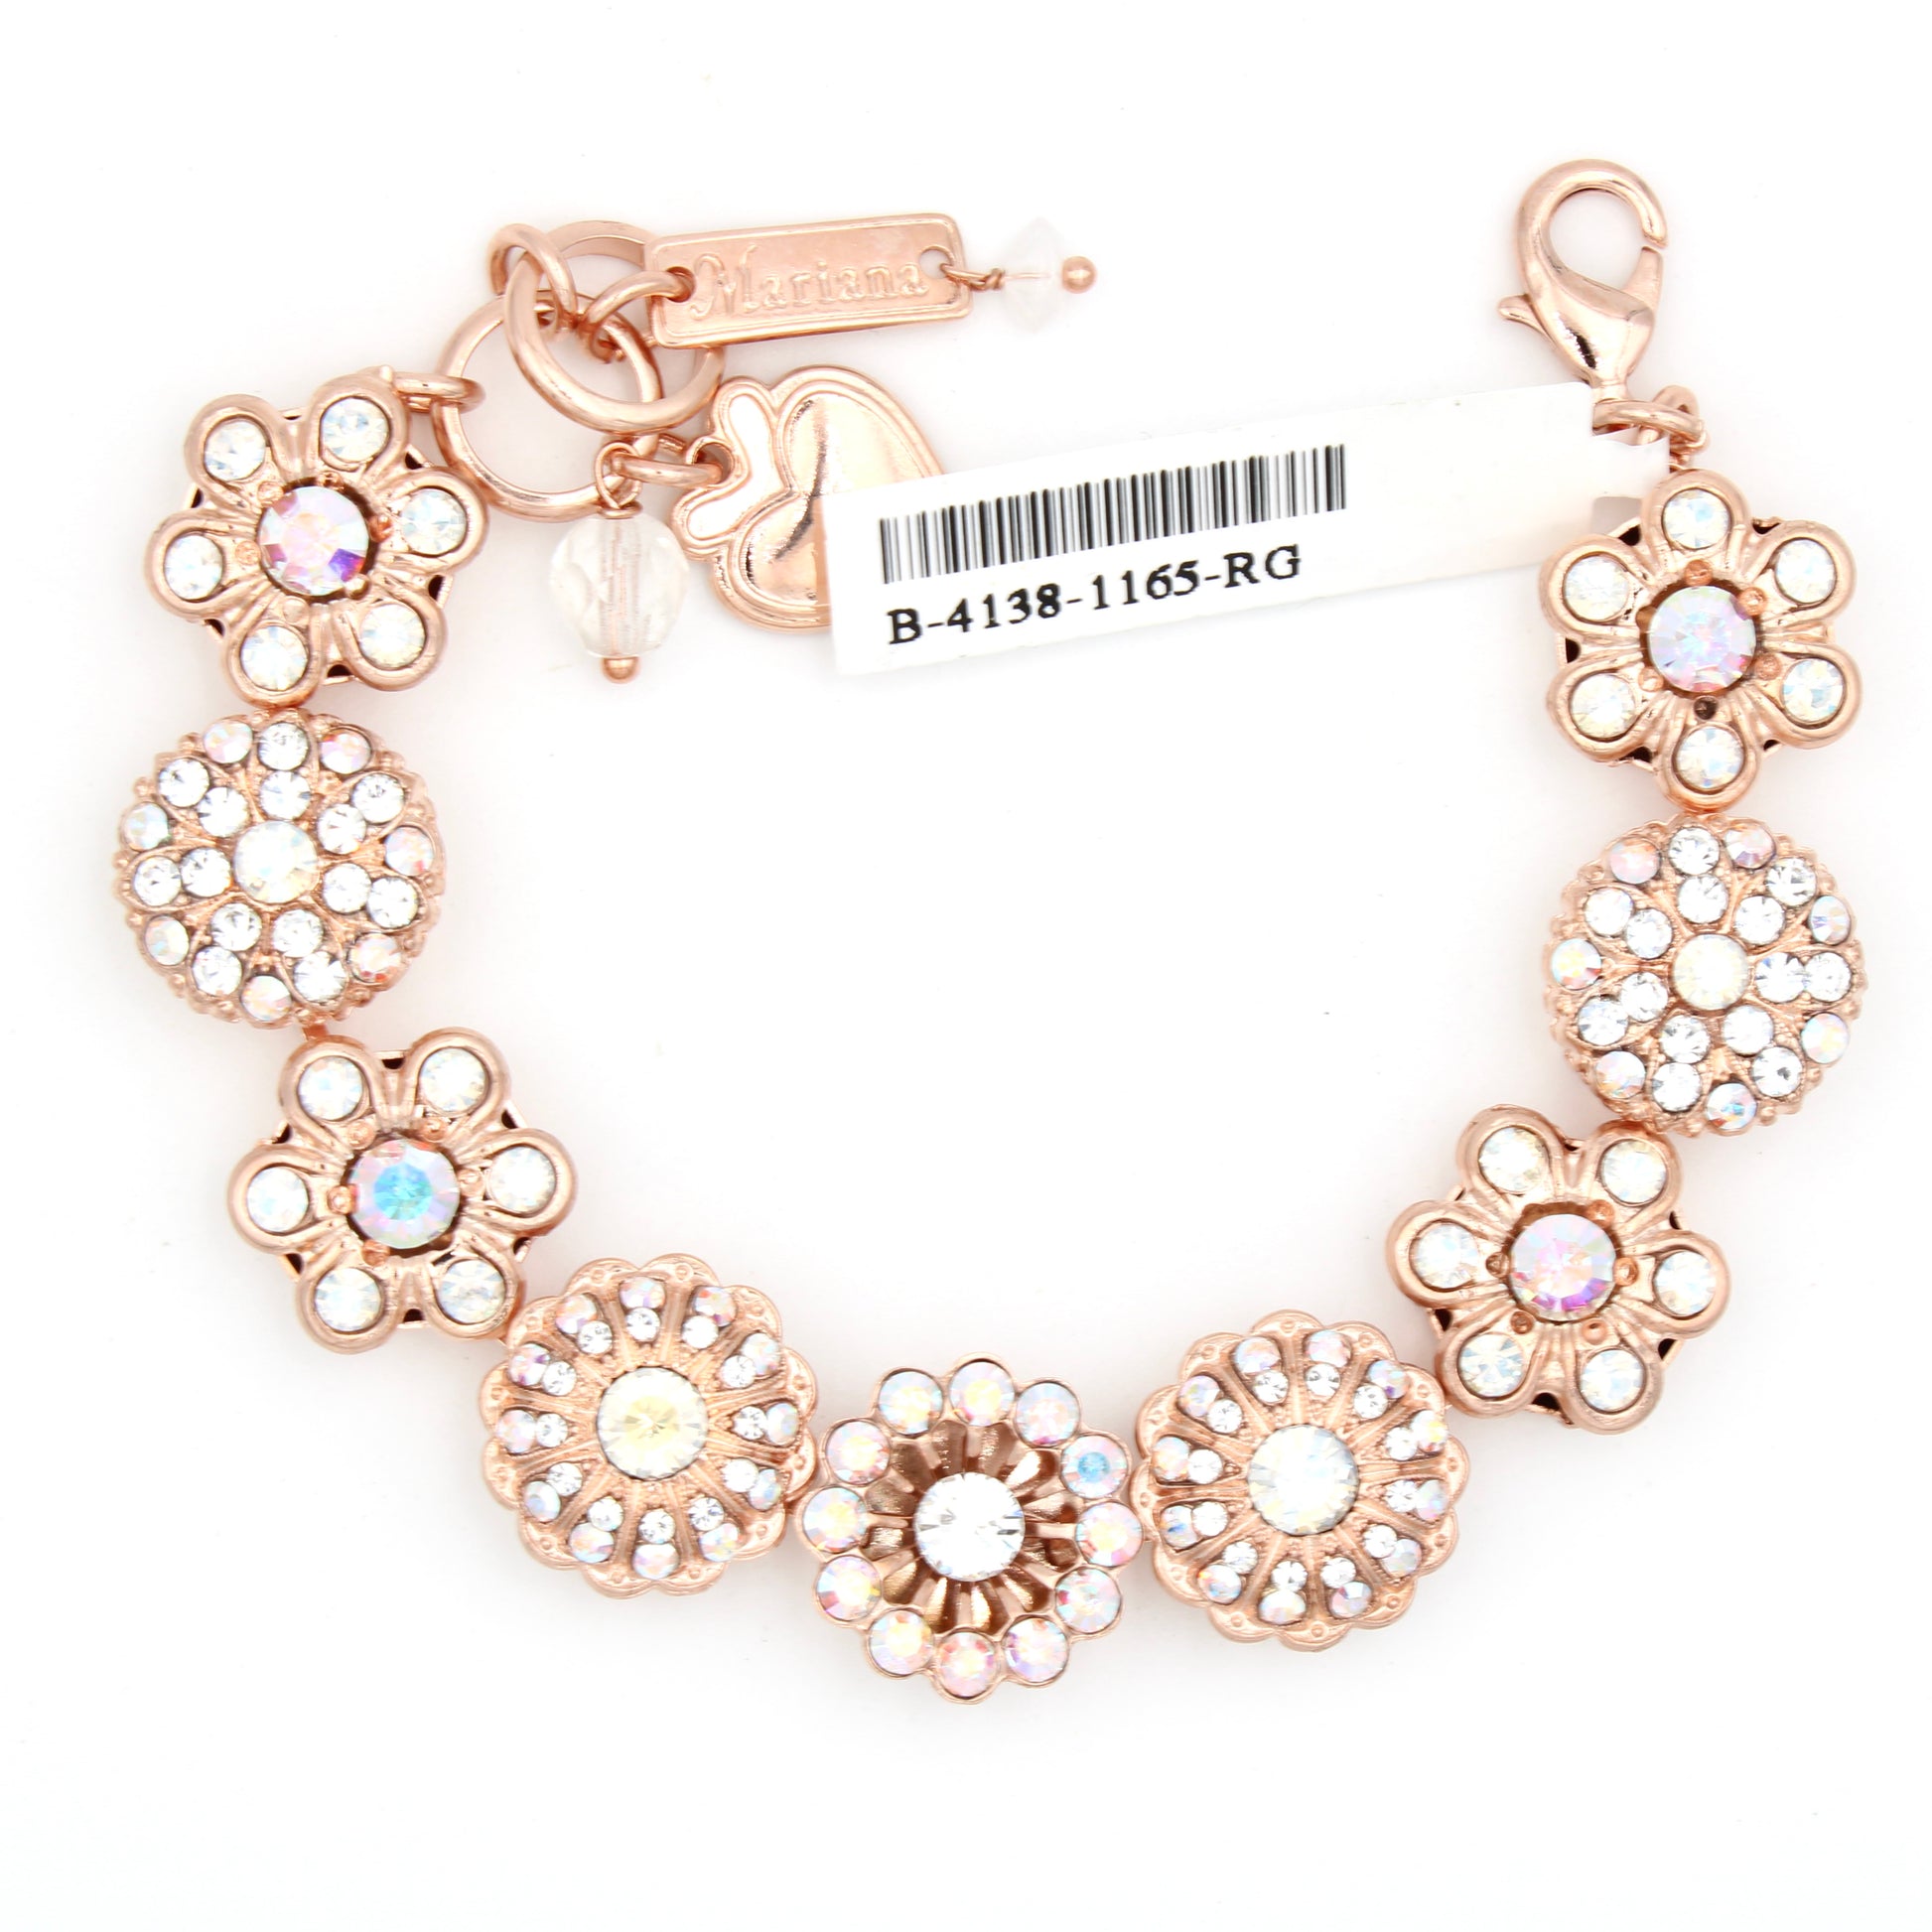 Winds of Change Collection Extra Luxurious Signature Bracelet in Rose Gold - MaryTyke's